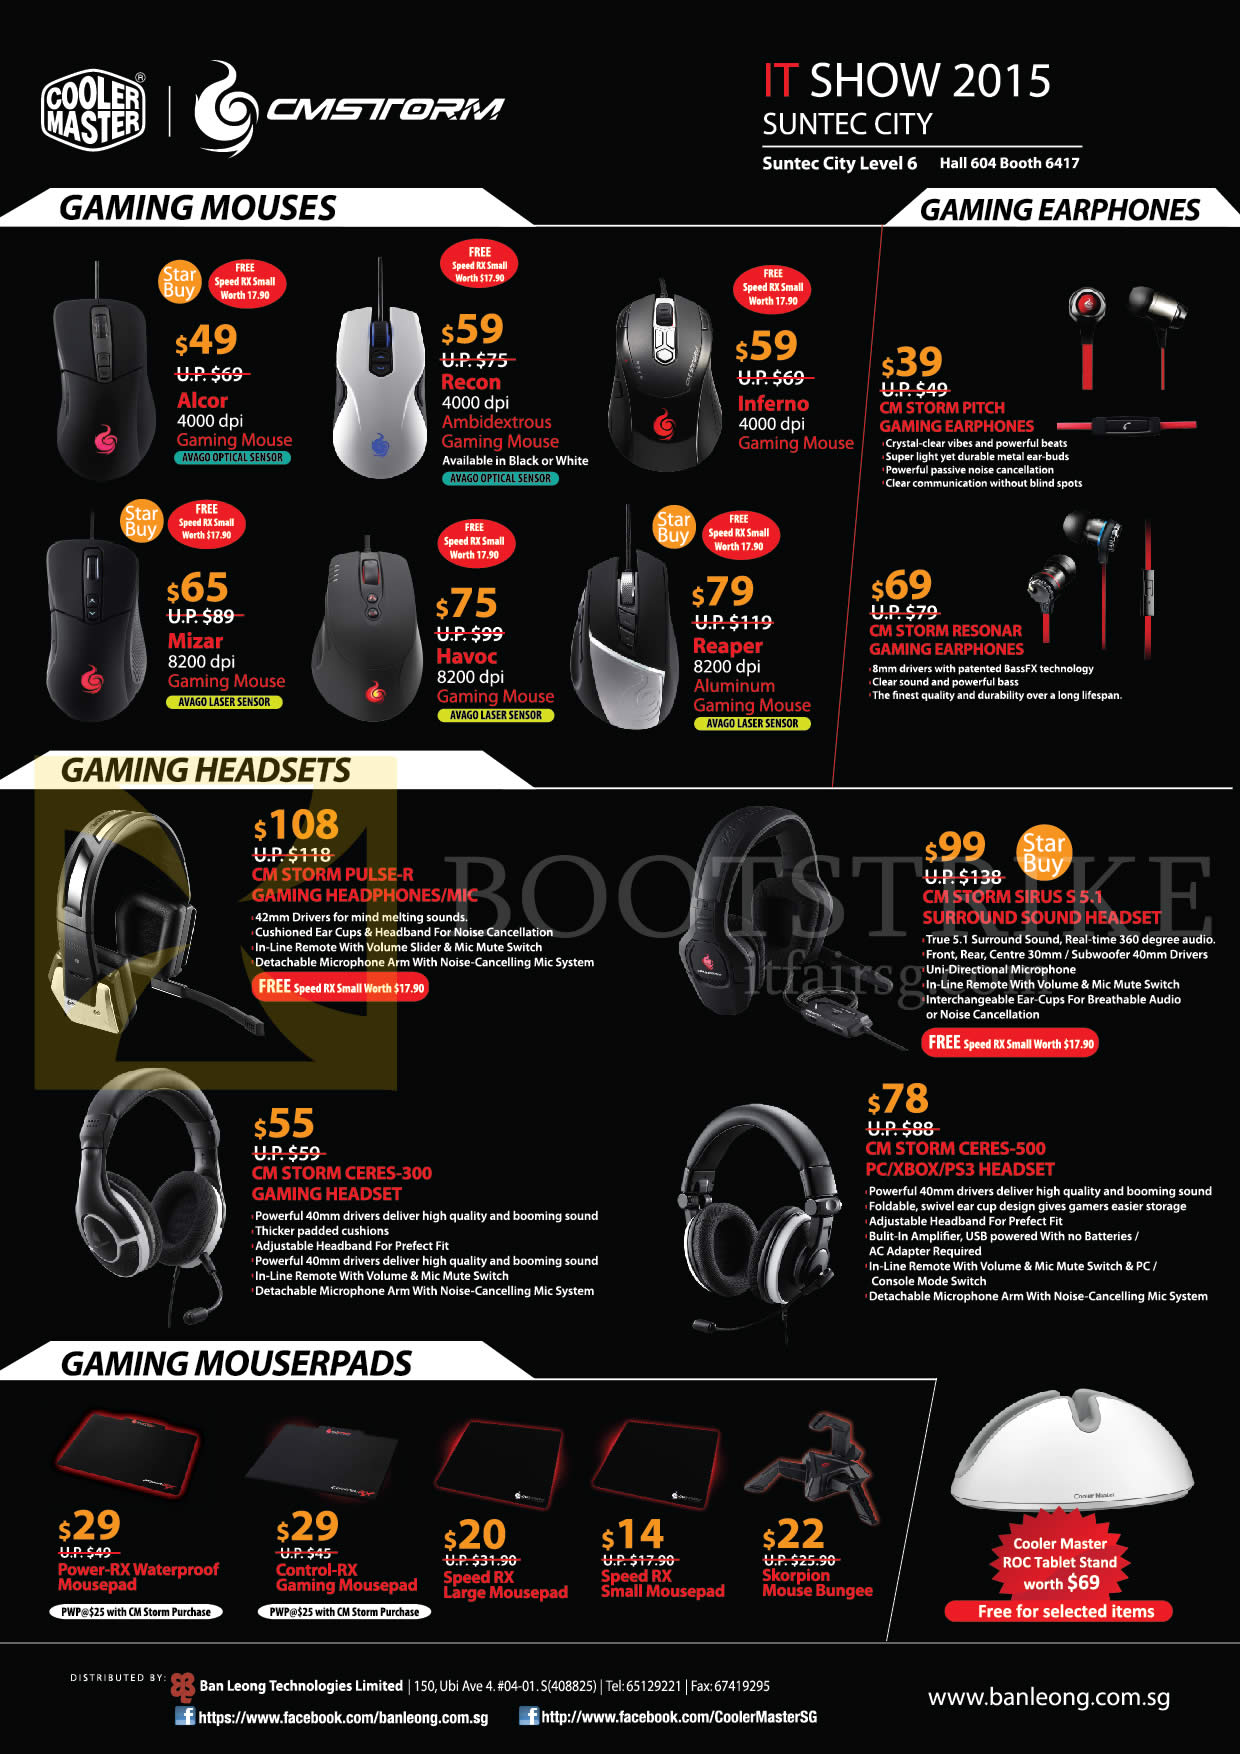 IT SHOW 2015 price list image brochure of Ban Leong Cooler Master CM Storm Gaming Mouses, Earphones, Headsets, Mousepads, Alcor, Recon, CM Storm Resonar, Reaper, Pulse-R, Ceres 300